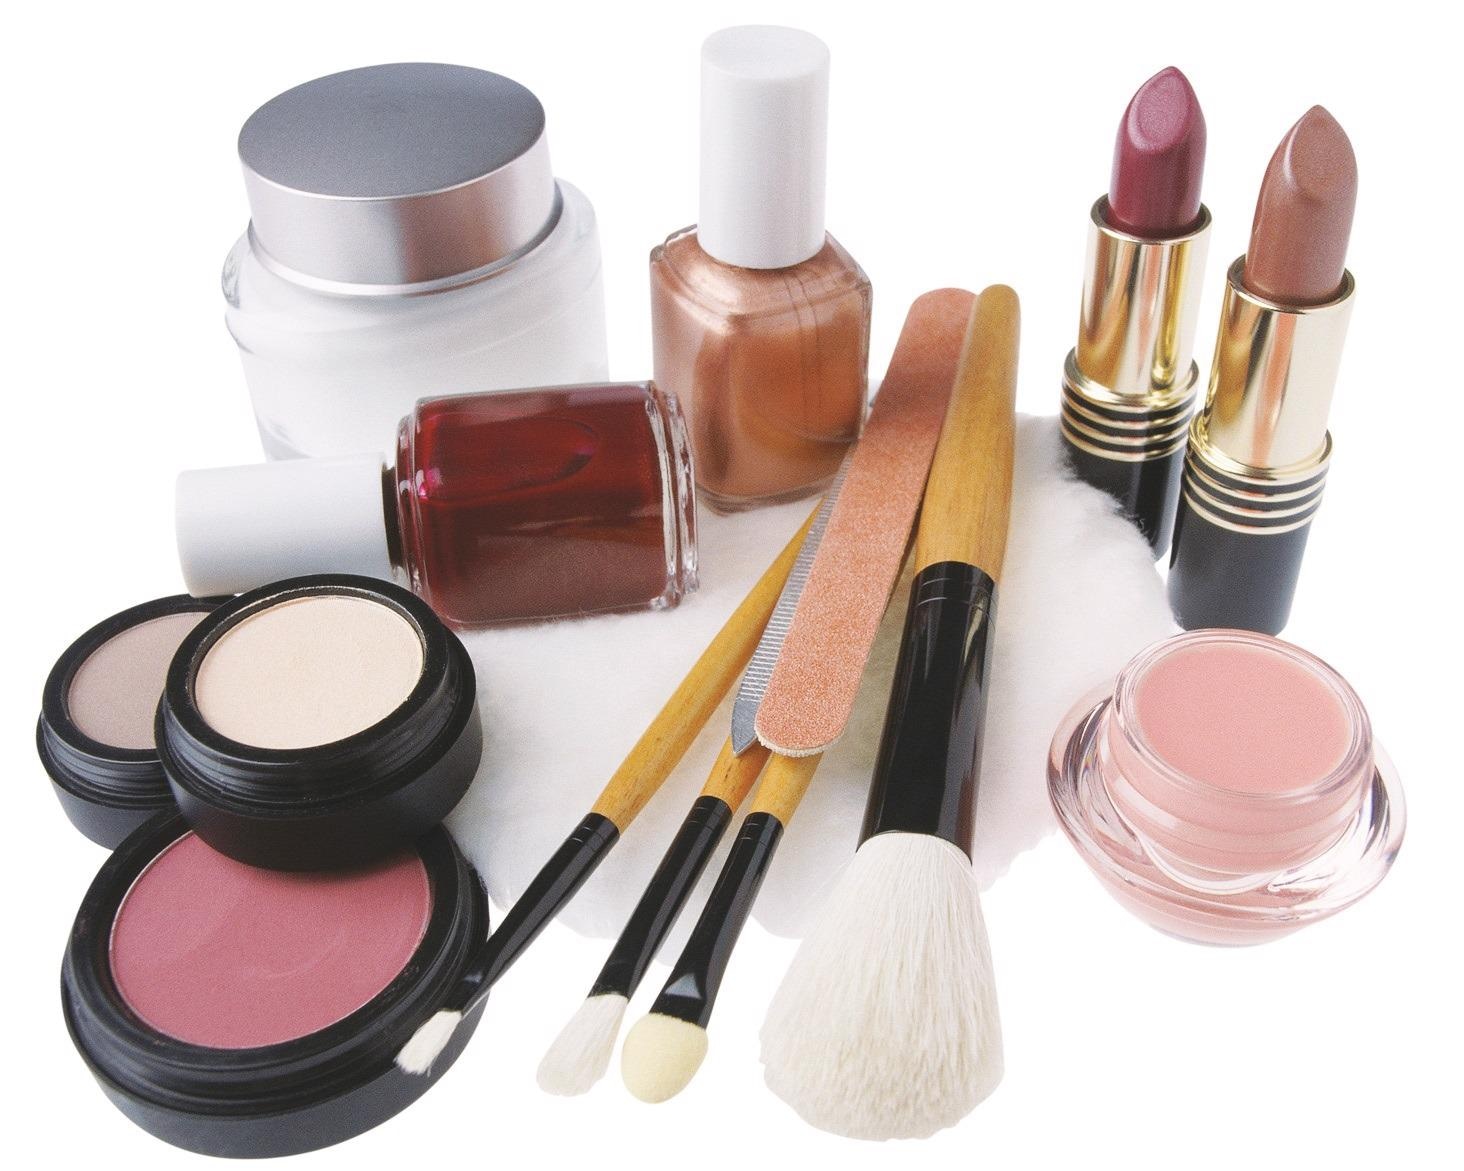 Analyzing the Photo Stability of Cosmetics